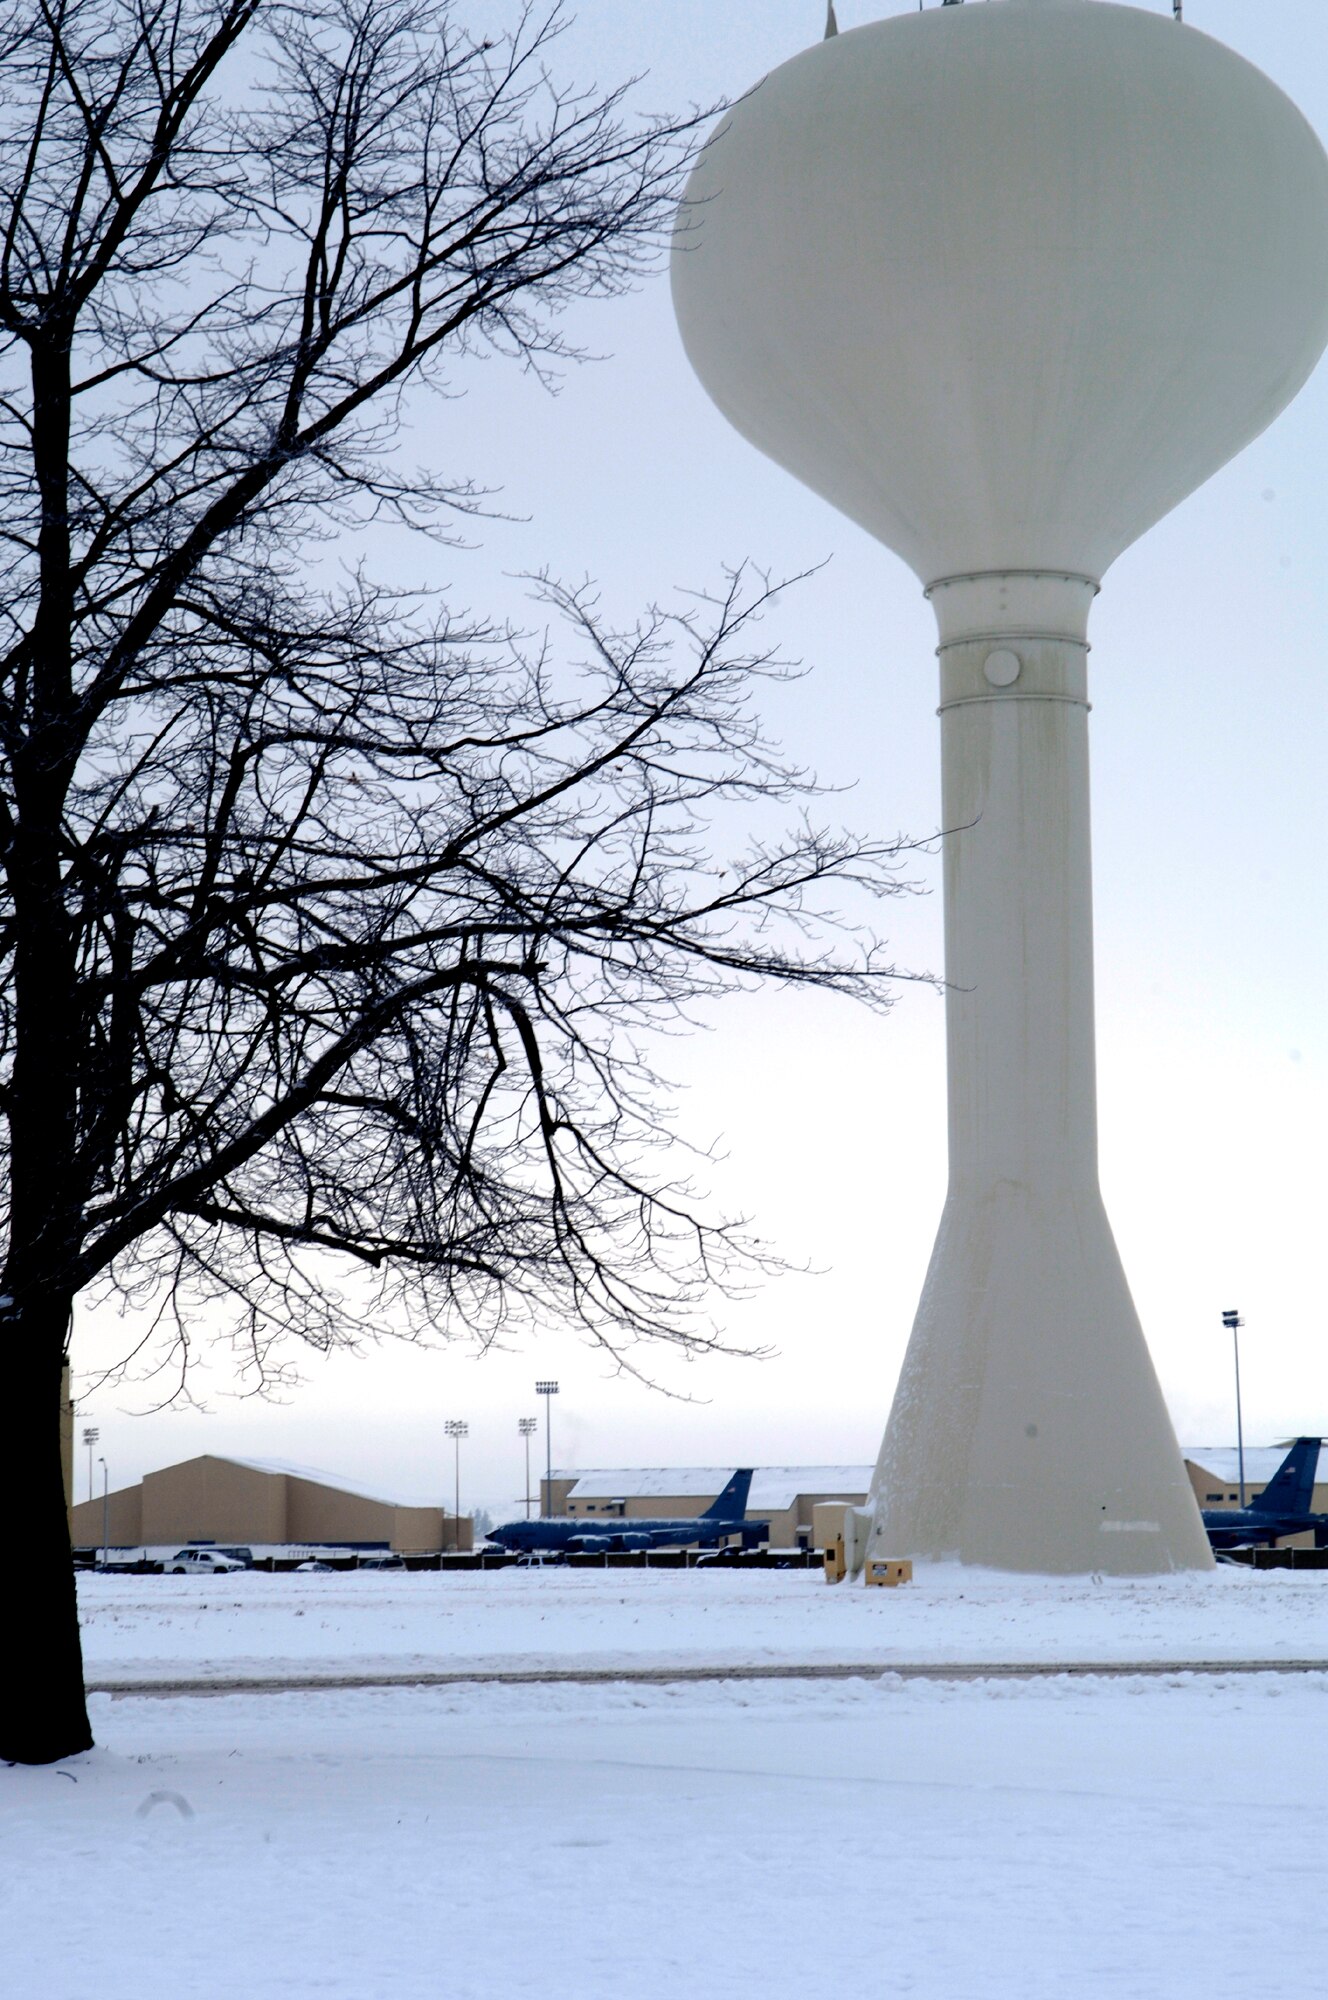 KC-135 Stratotankers sit on the runway behind the Fairchild water tower. Over the past week, Fairchild has received a layer of snow that has blanketed the entire base in white.